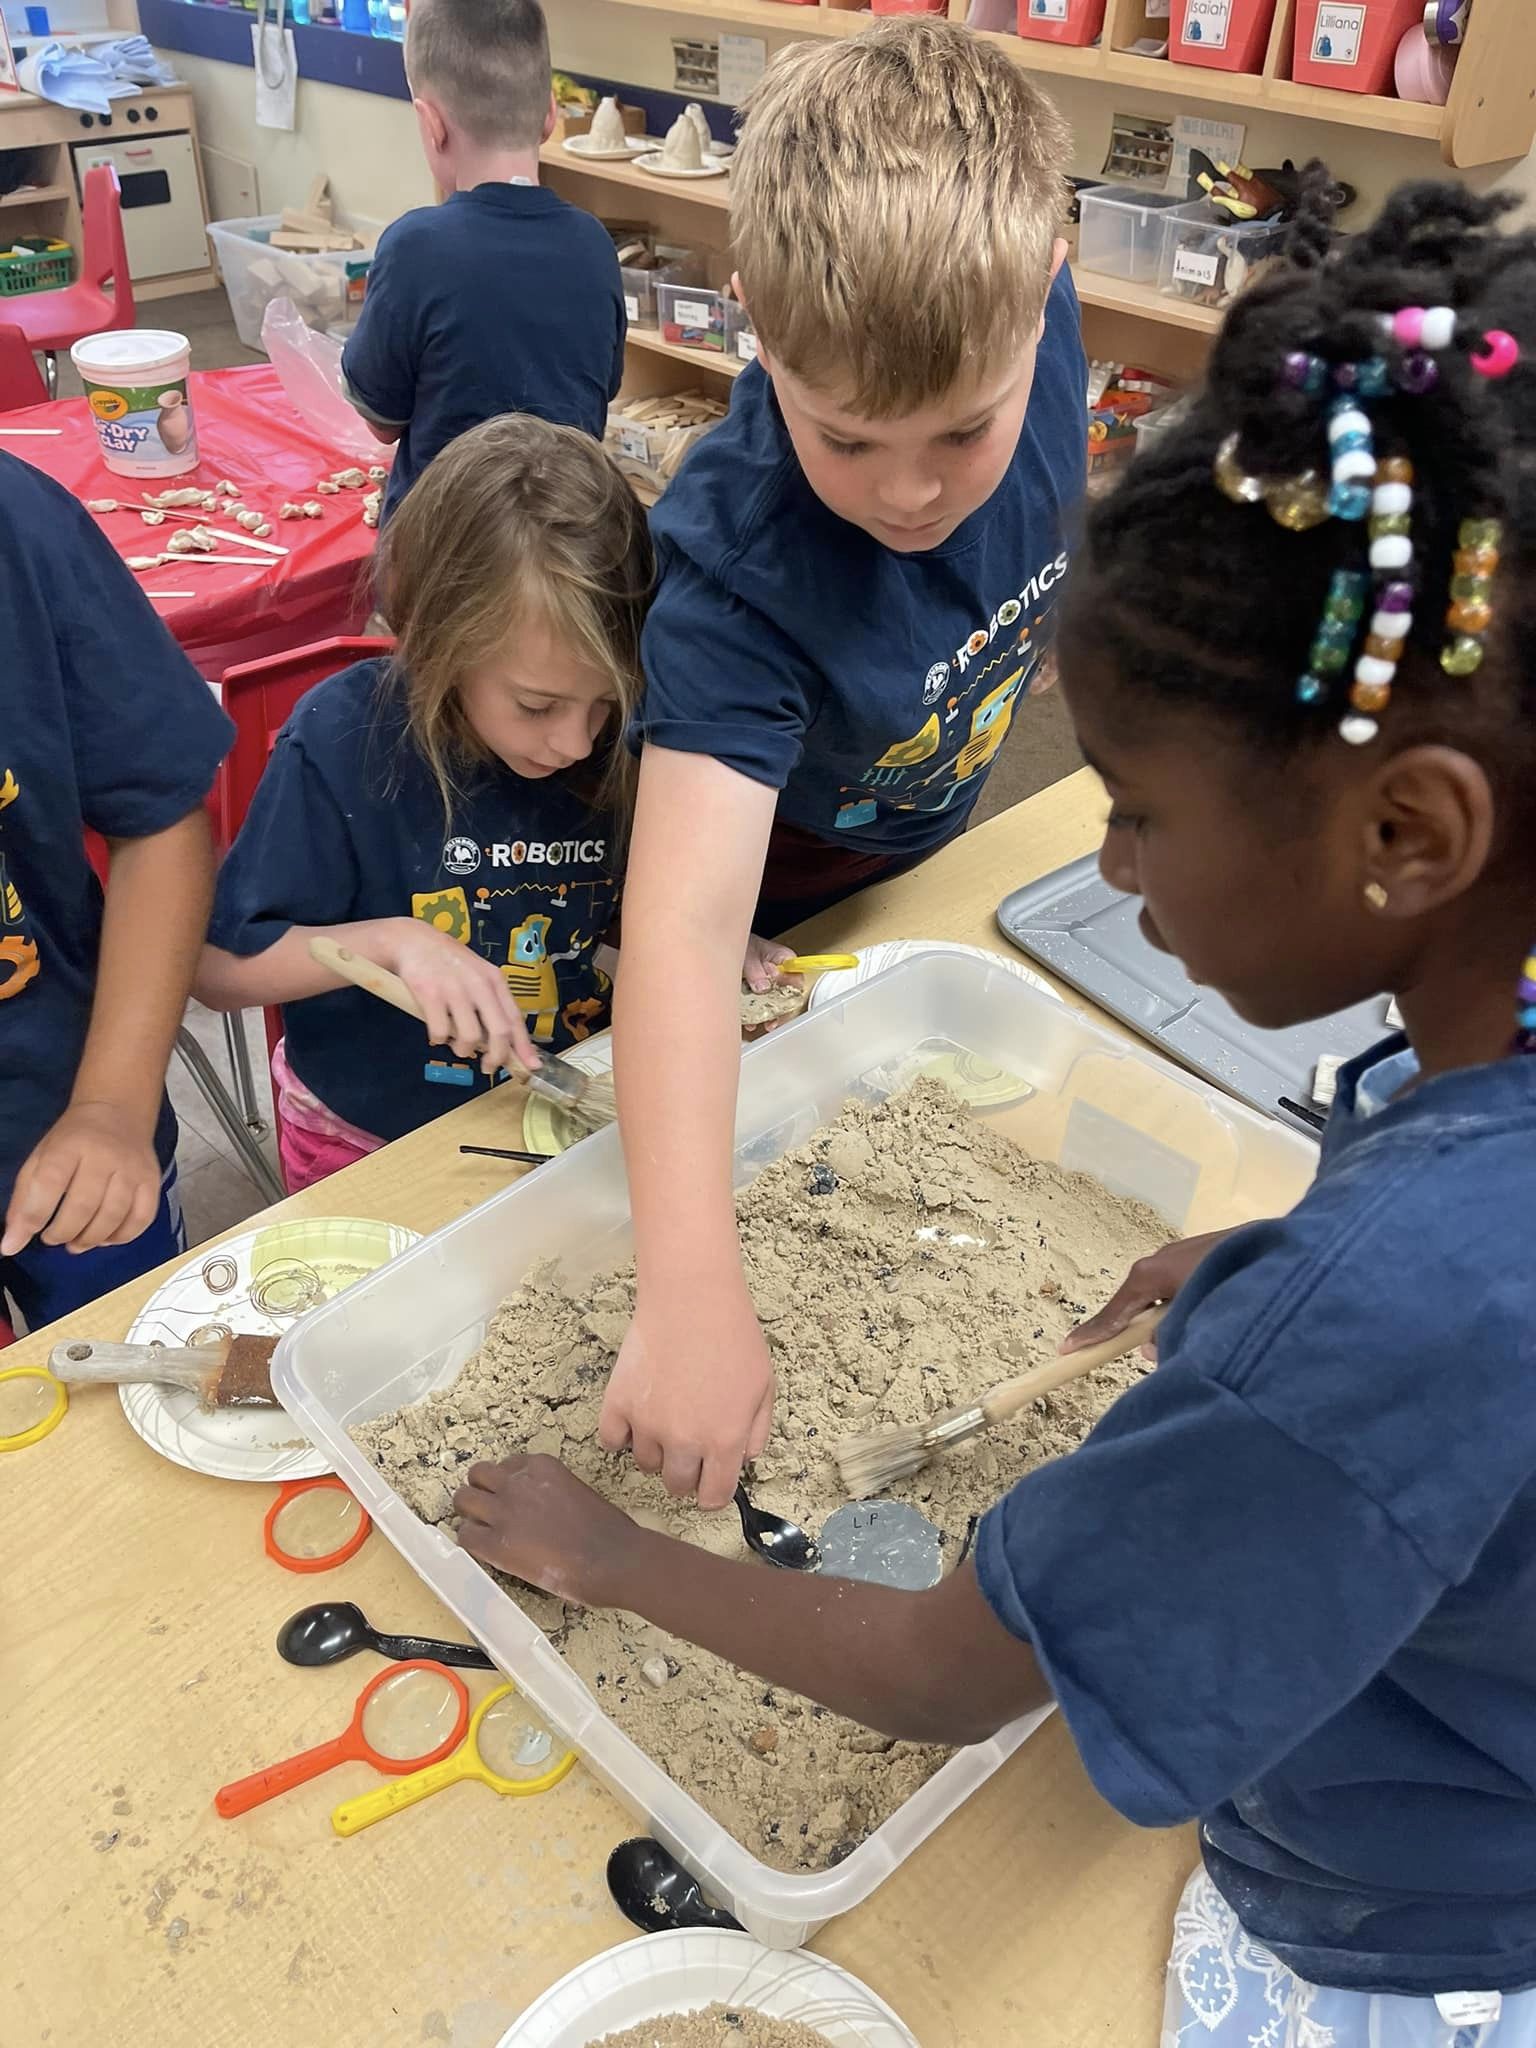 As part of the two-week robotics curriculum, children engaged in fun STEM lessons about fossil digging during the Primrose Schools Summer Adventure Club.